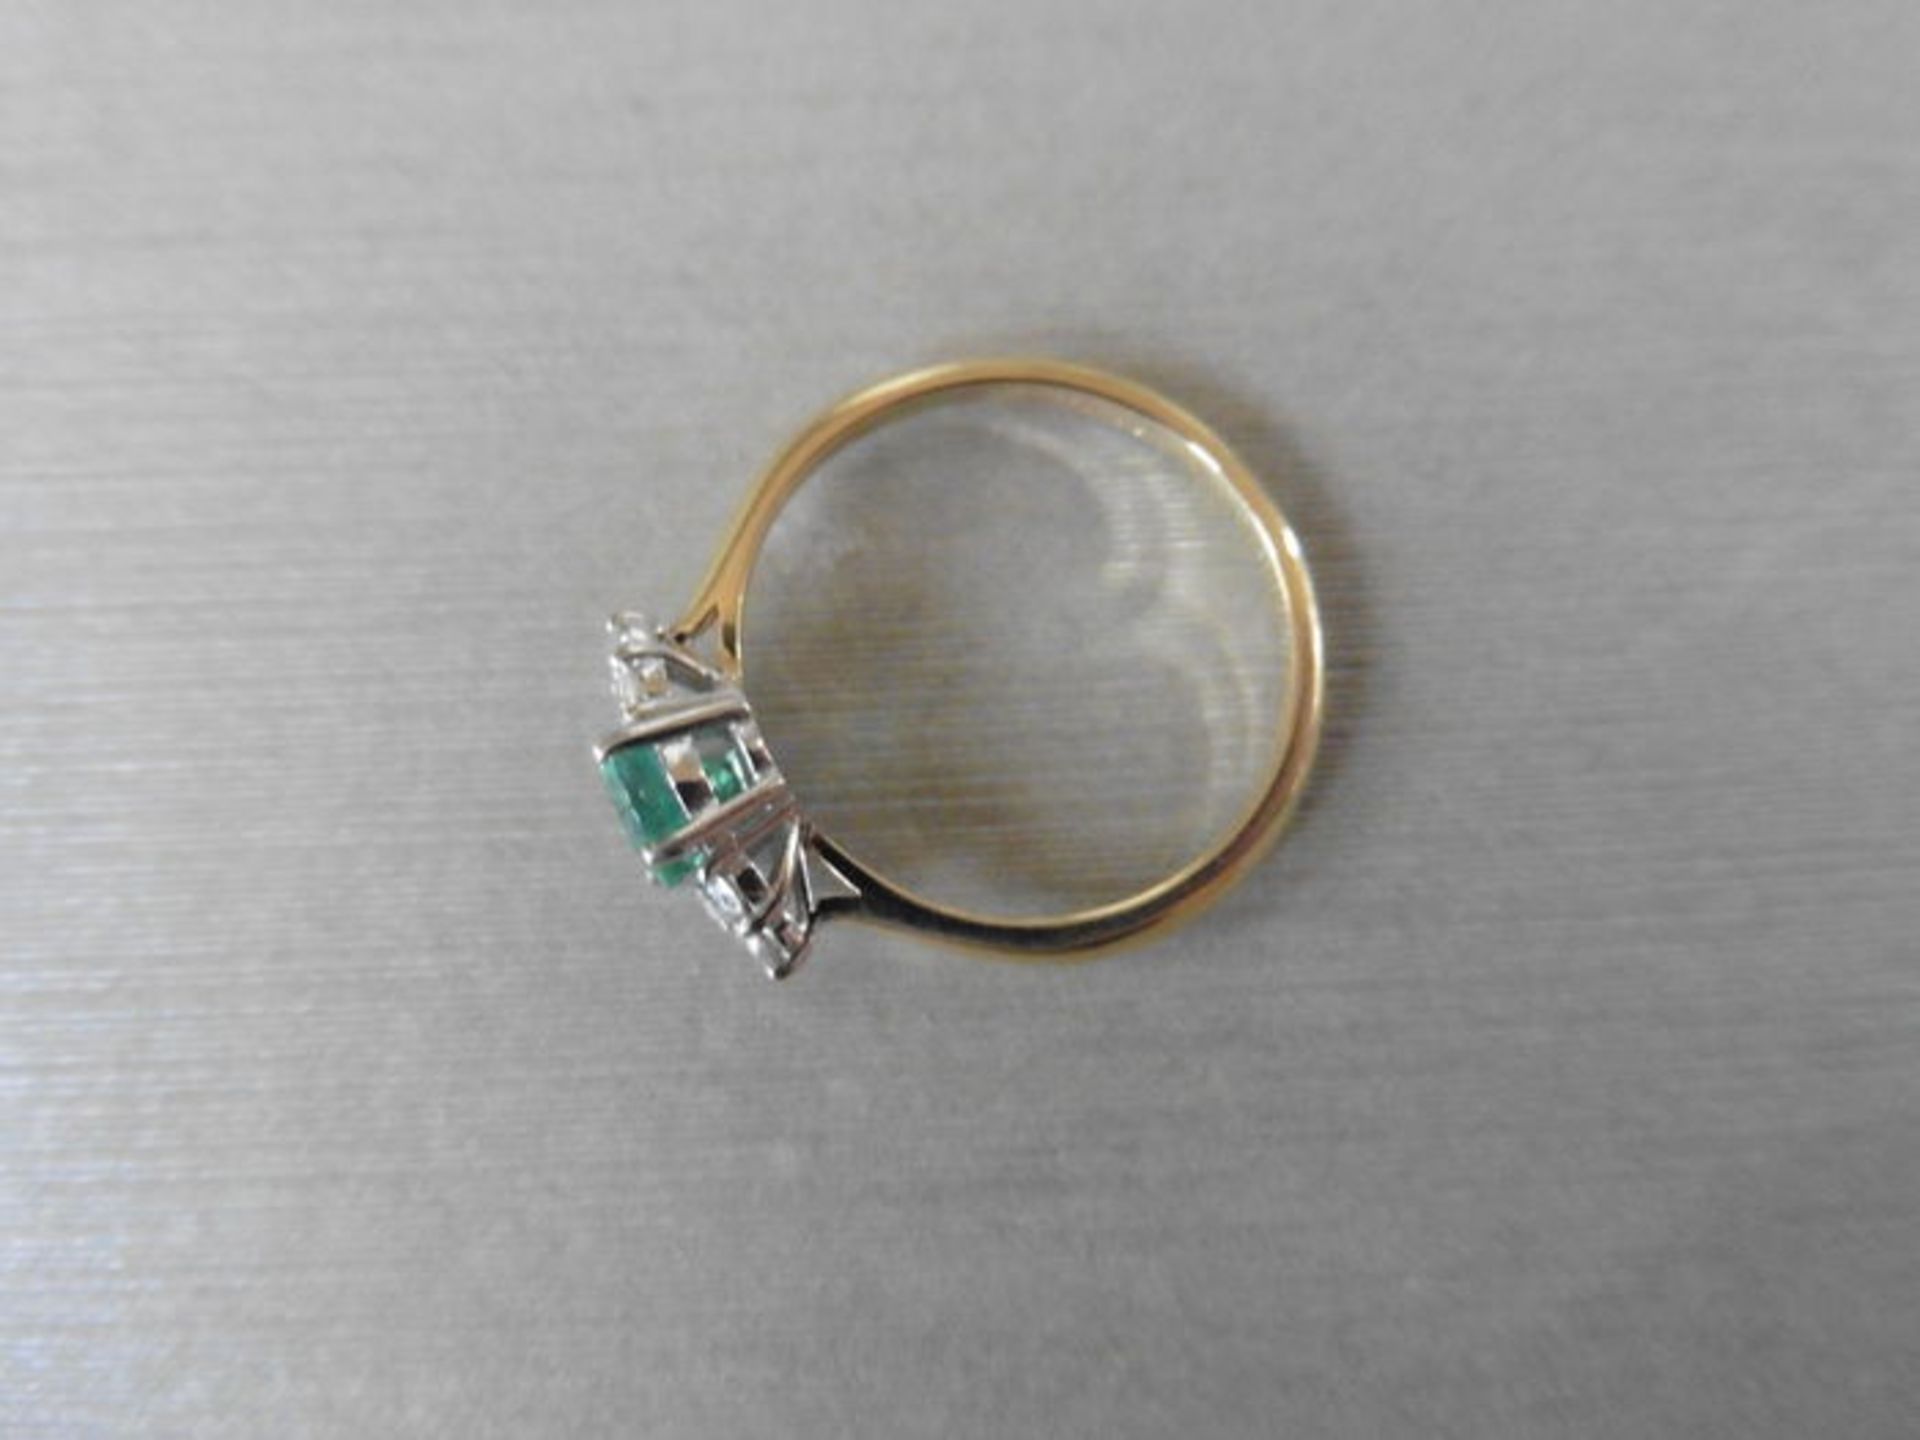 0.80ct emerald and diamond dress ring. 7x 5mm oval cut emerald (treated) with 3 small diamonds set - Image 3 of 3